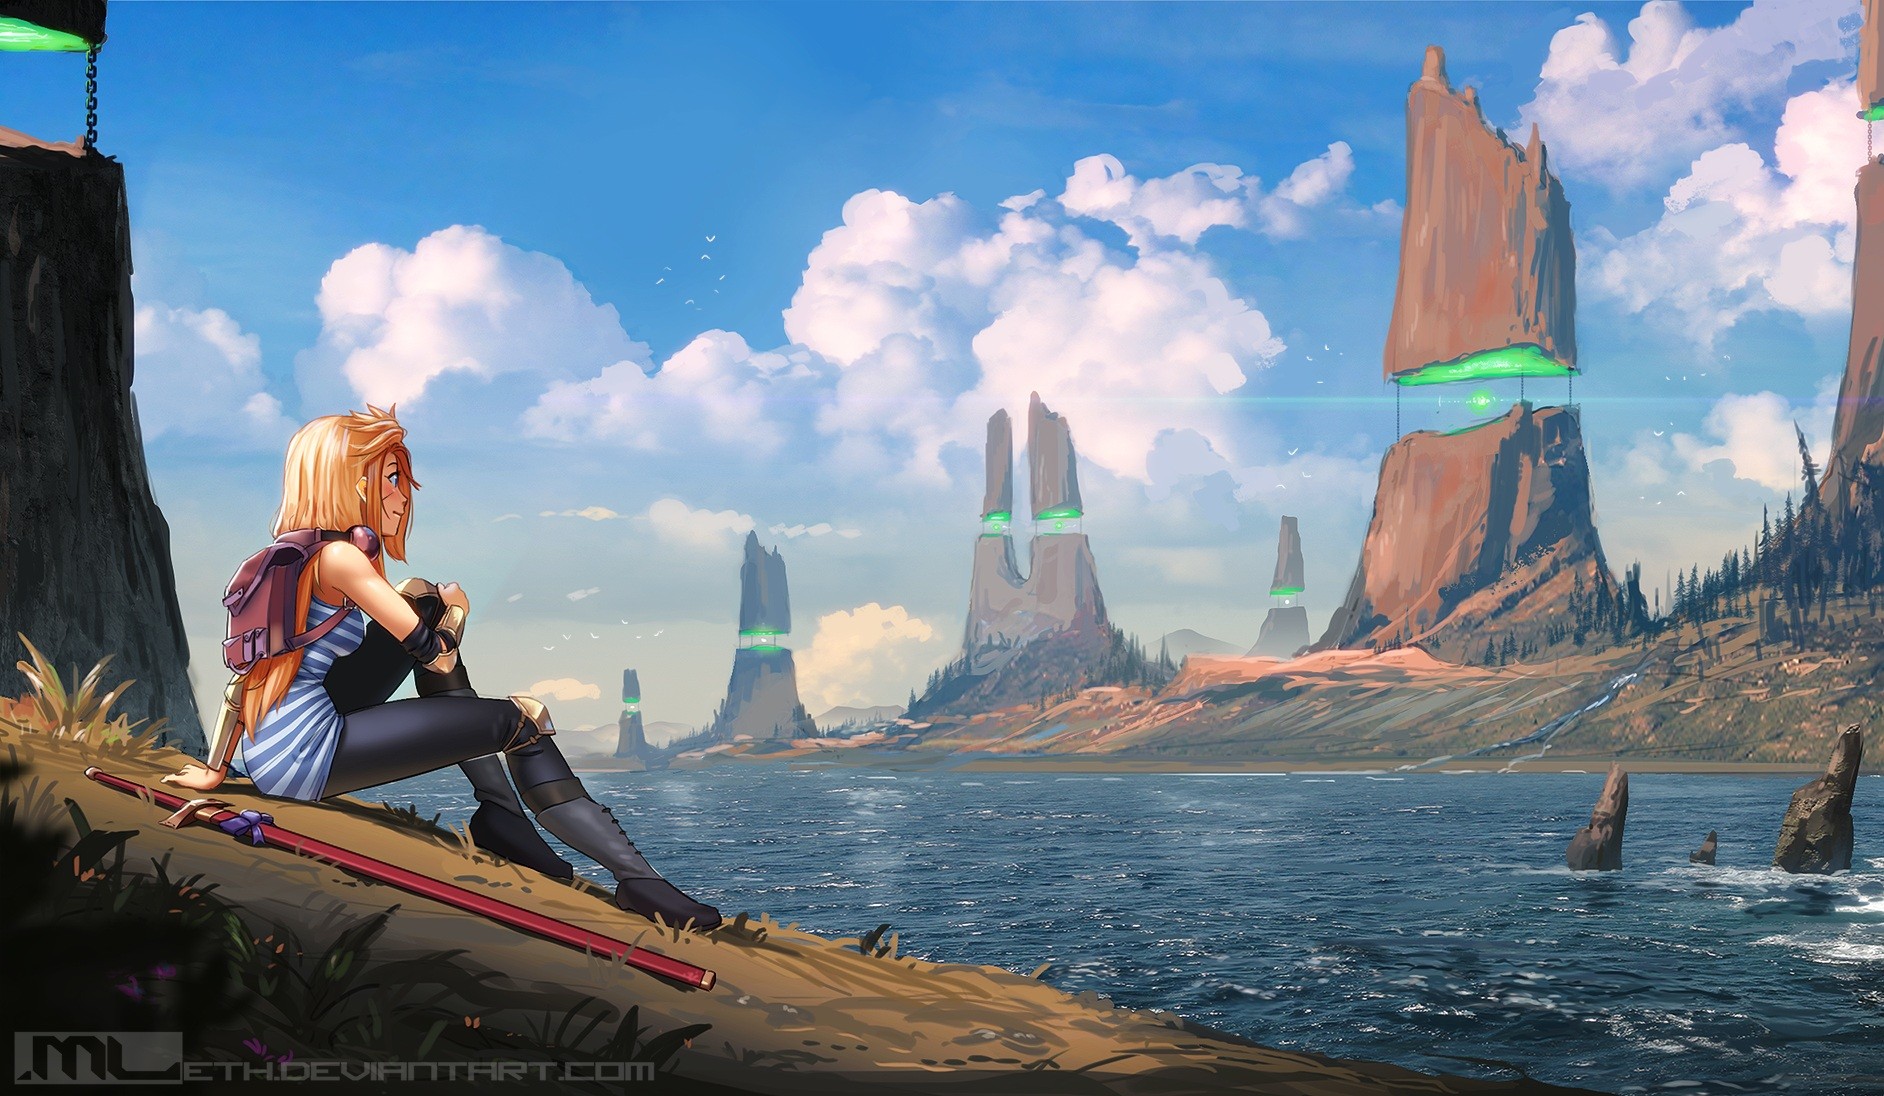 Anime 1884x1096 anime anime girls blonde boots clouds long hair sword water weapon landscape sitting DeviantArt women outdoors striped clothing